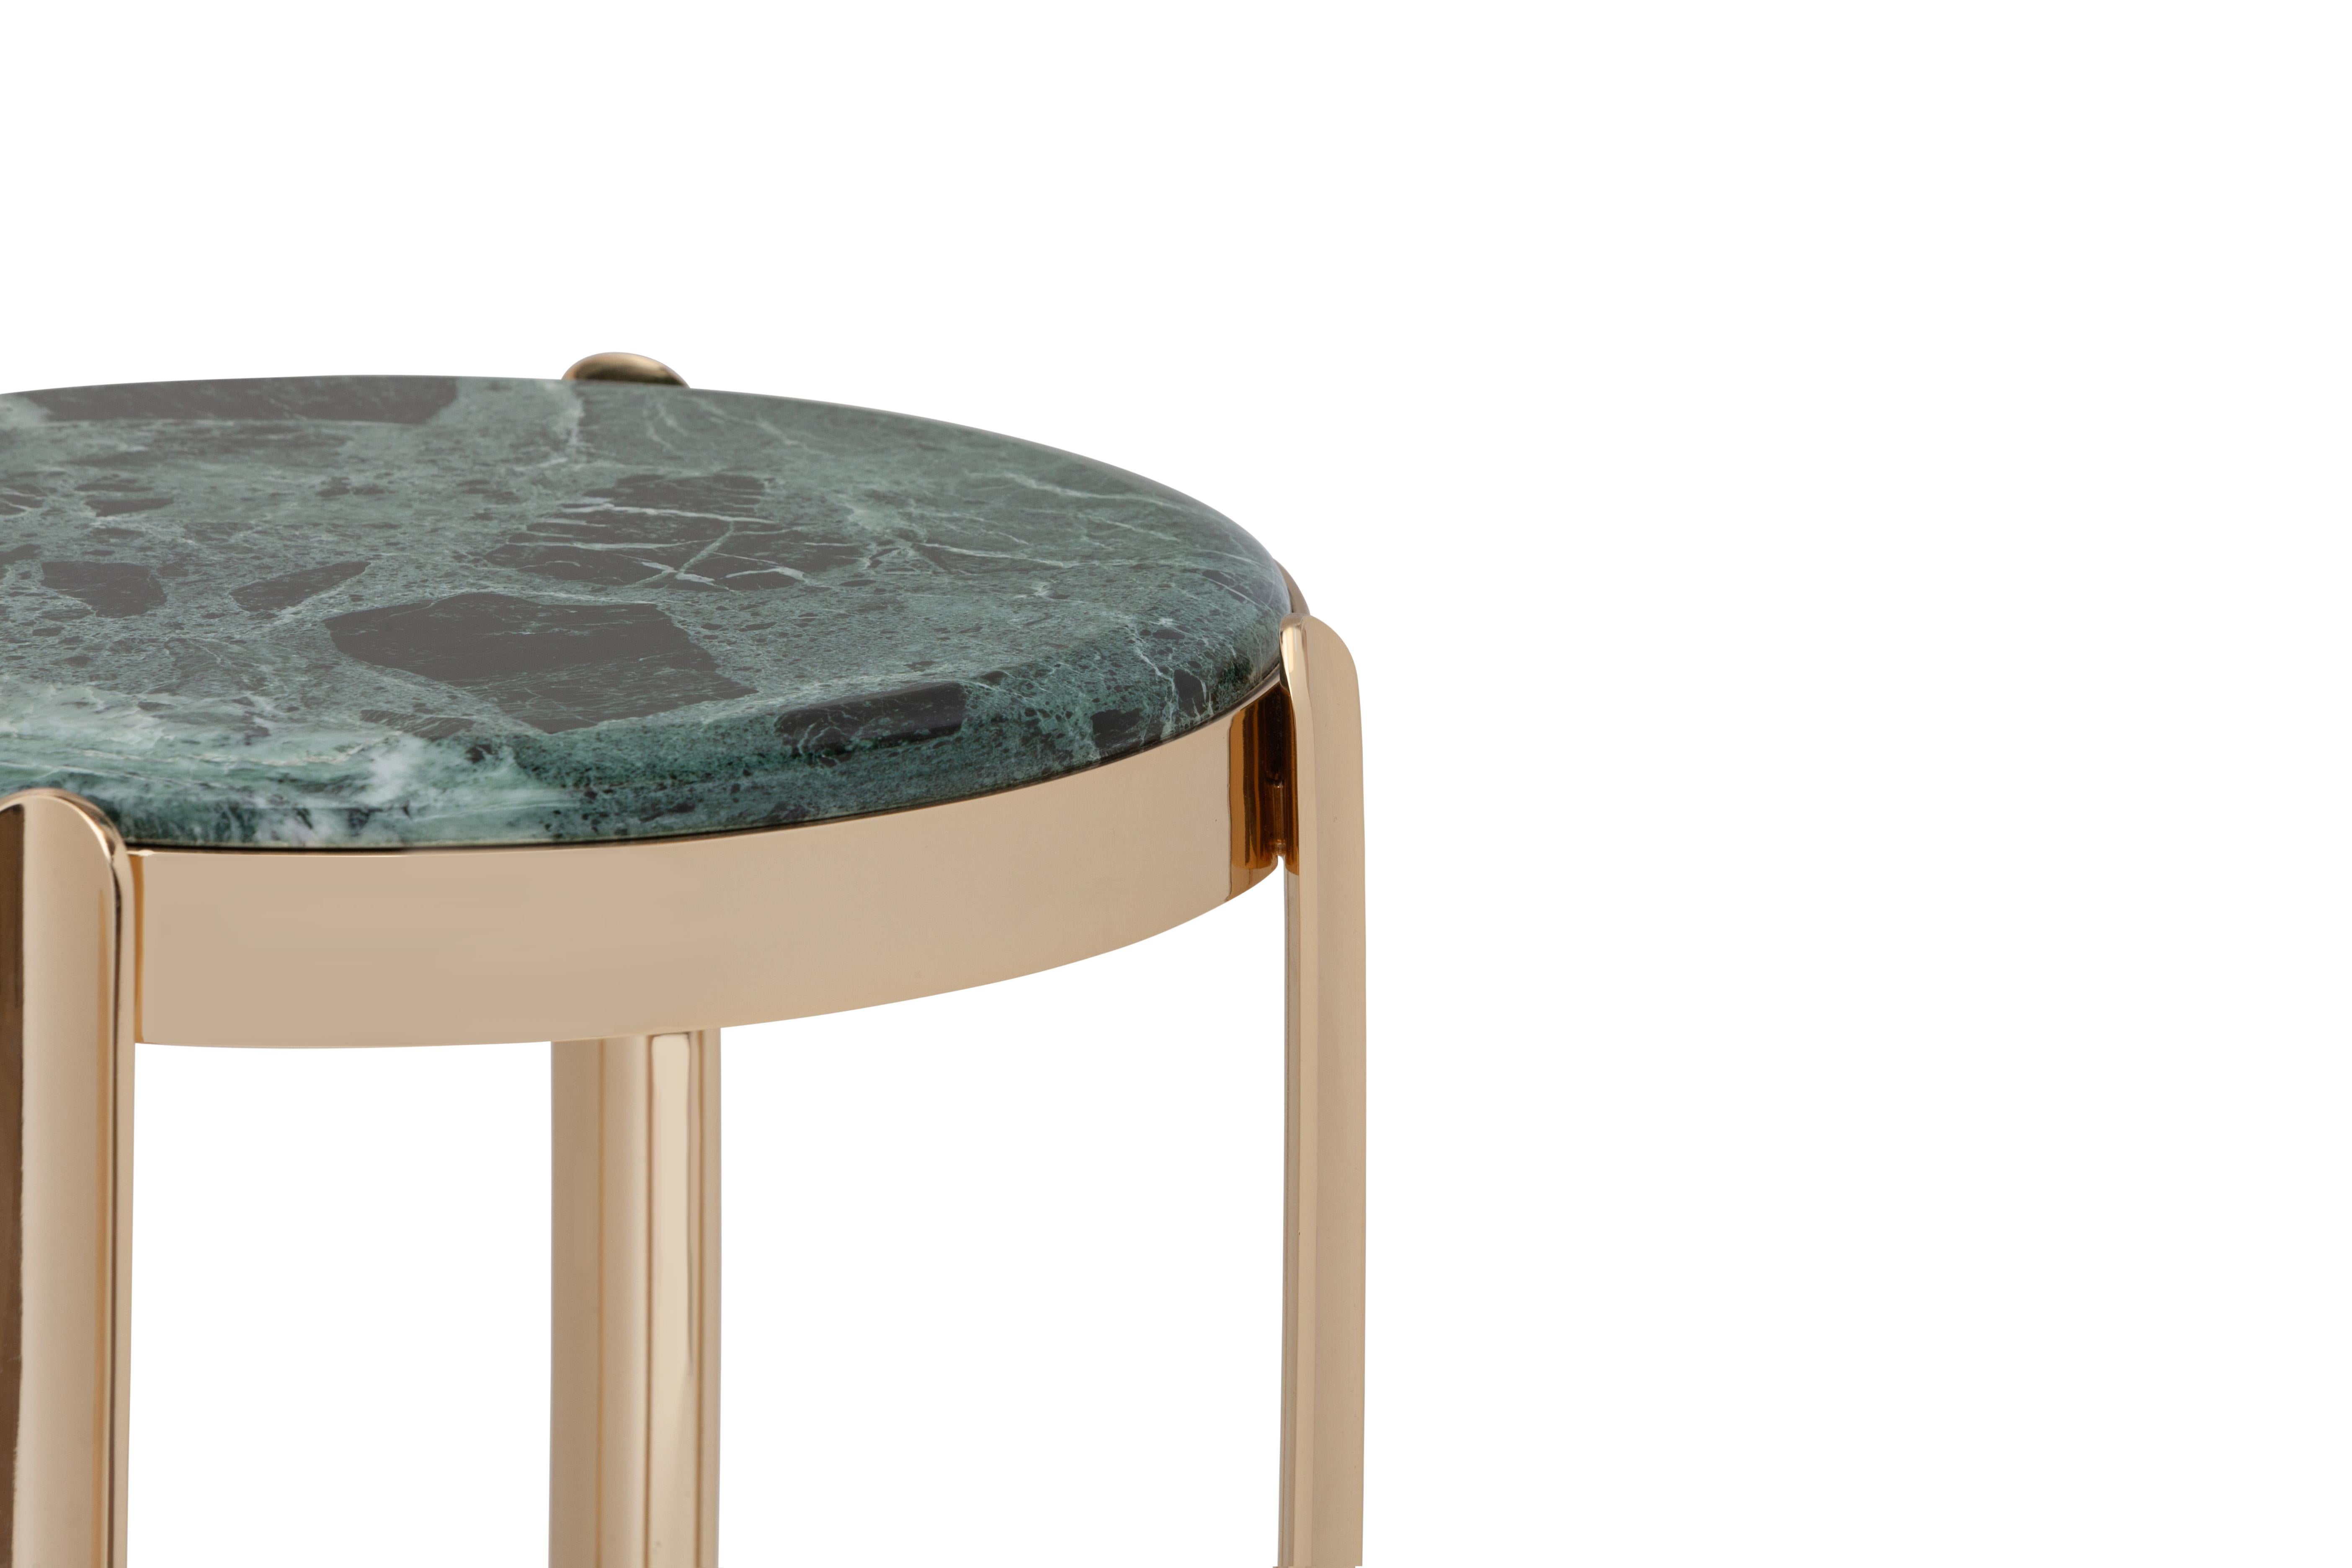 21st Century Art Déco Elie Saab Maison Alpine Green Brass Side Table, Italy

Named after its strategic position in interiors, the Zenith low tables and consoles add a refined and contemporary glamour to each room. Series of low tables, consoles and